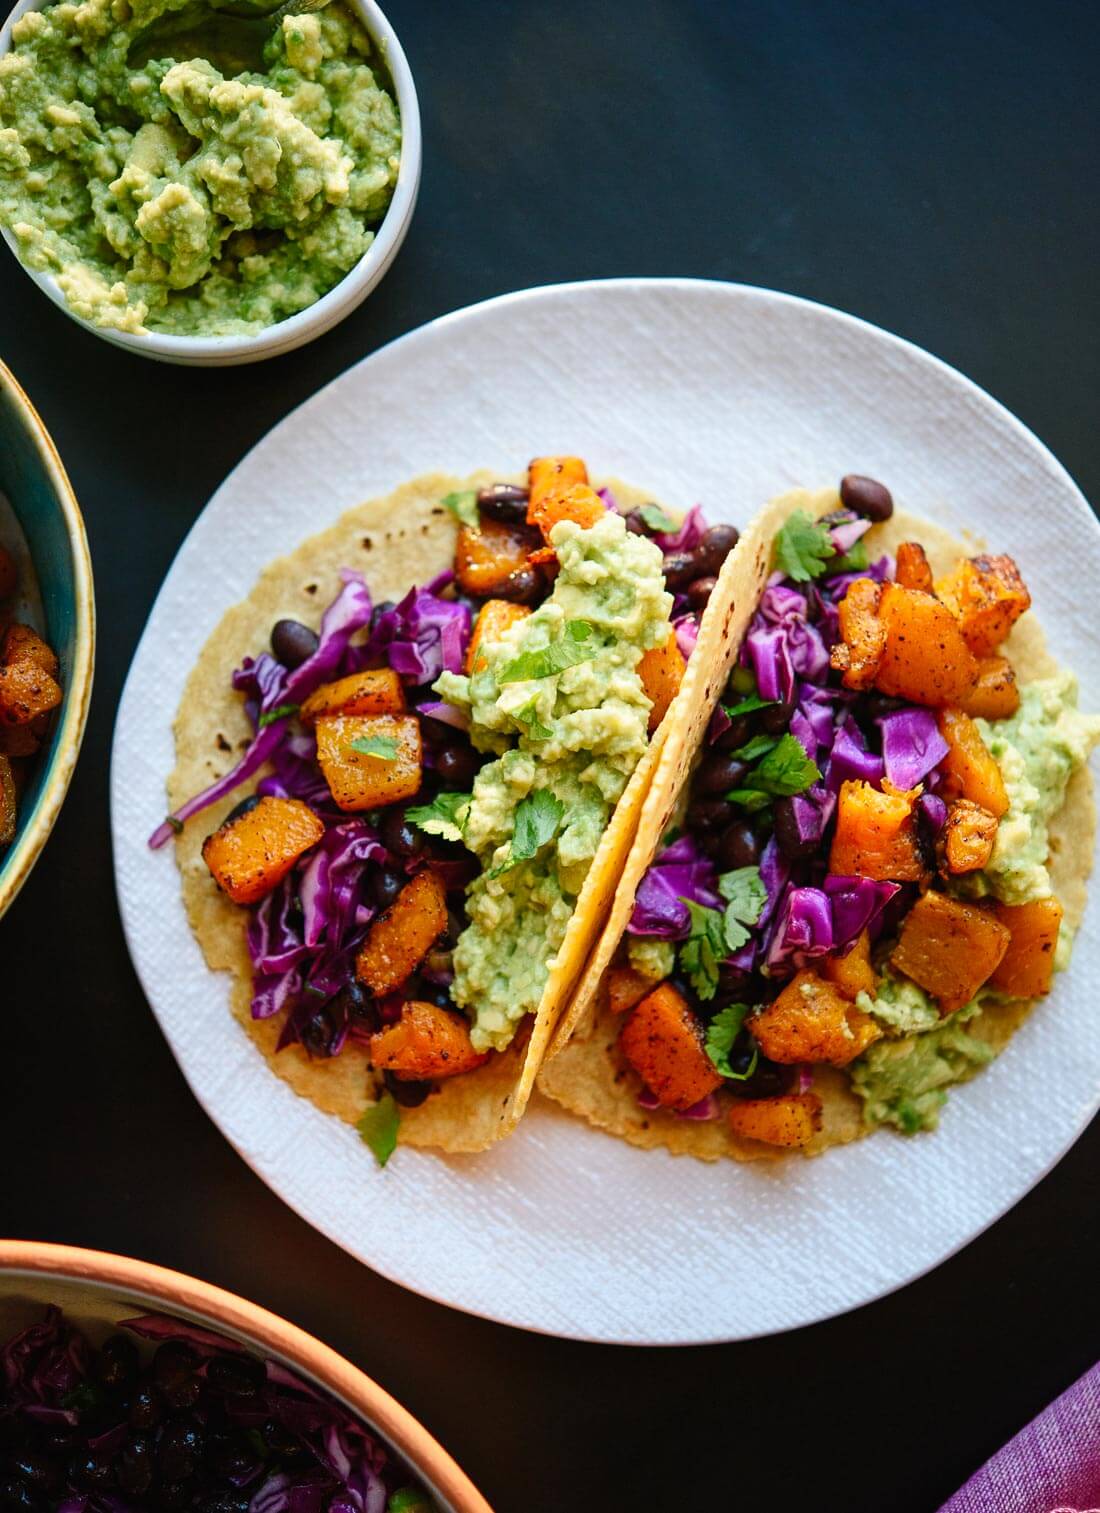 These roasted butternut squash tacos with slaw are bursting with flavor and so good for you, too. cookieandkate.com